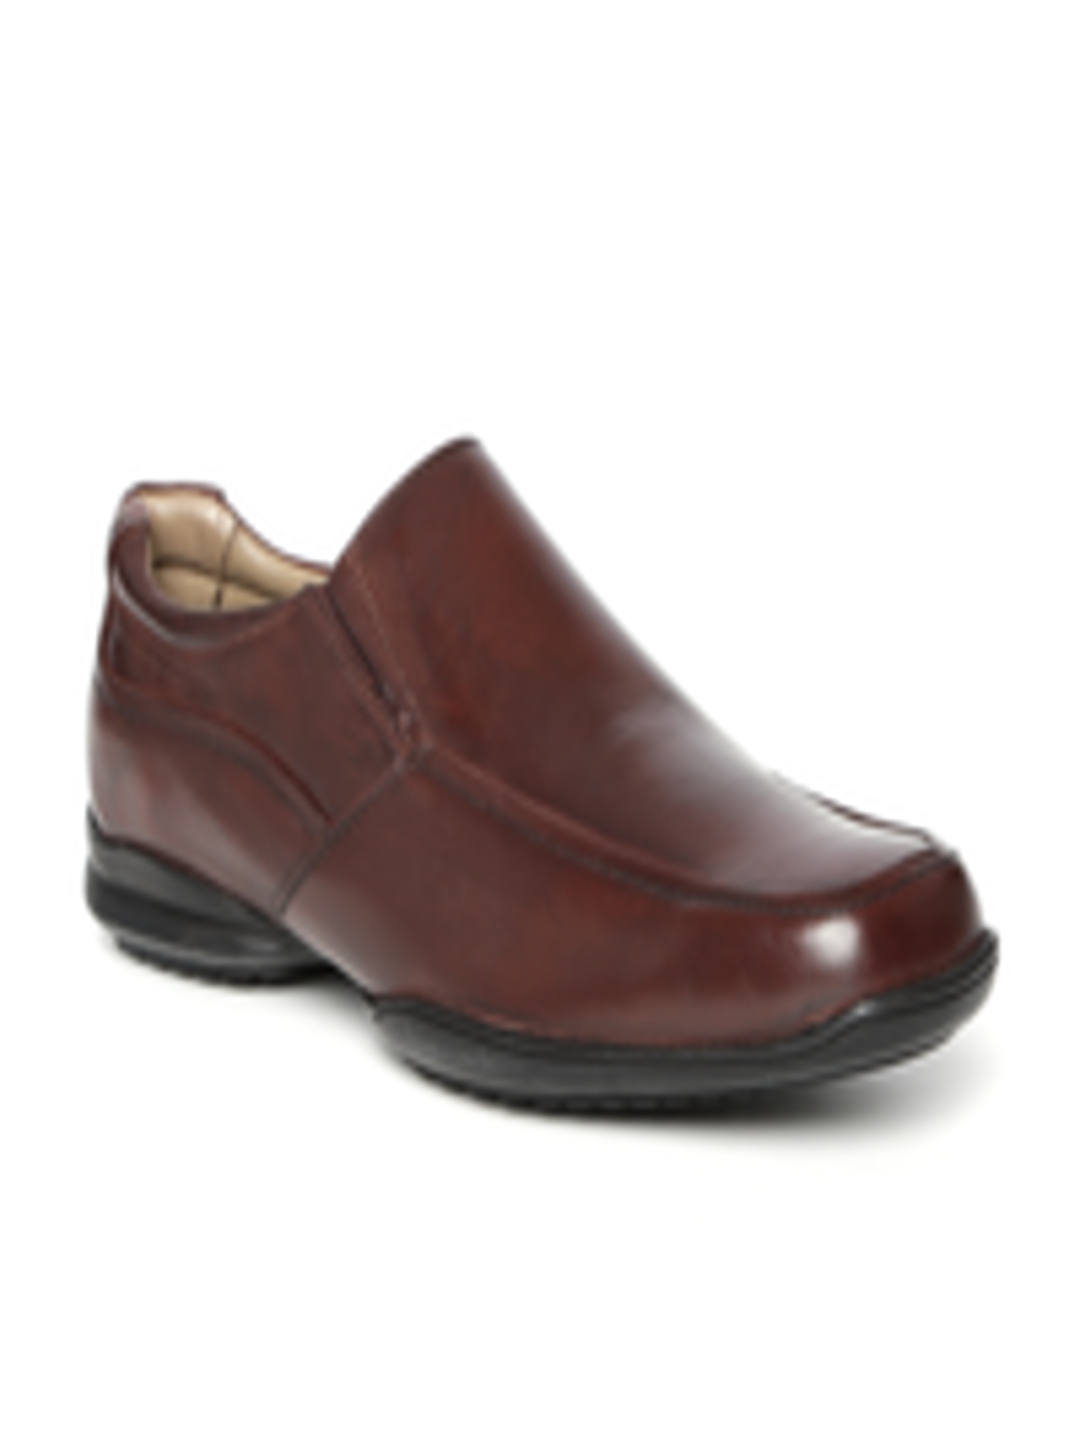 Buy Hush Puppies By Bata Brown Leather Semiformal Shoes - Formal Shoes ...